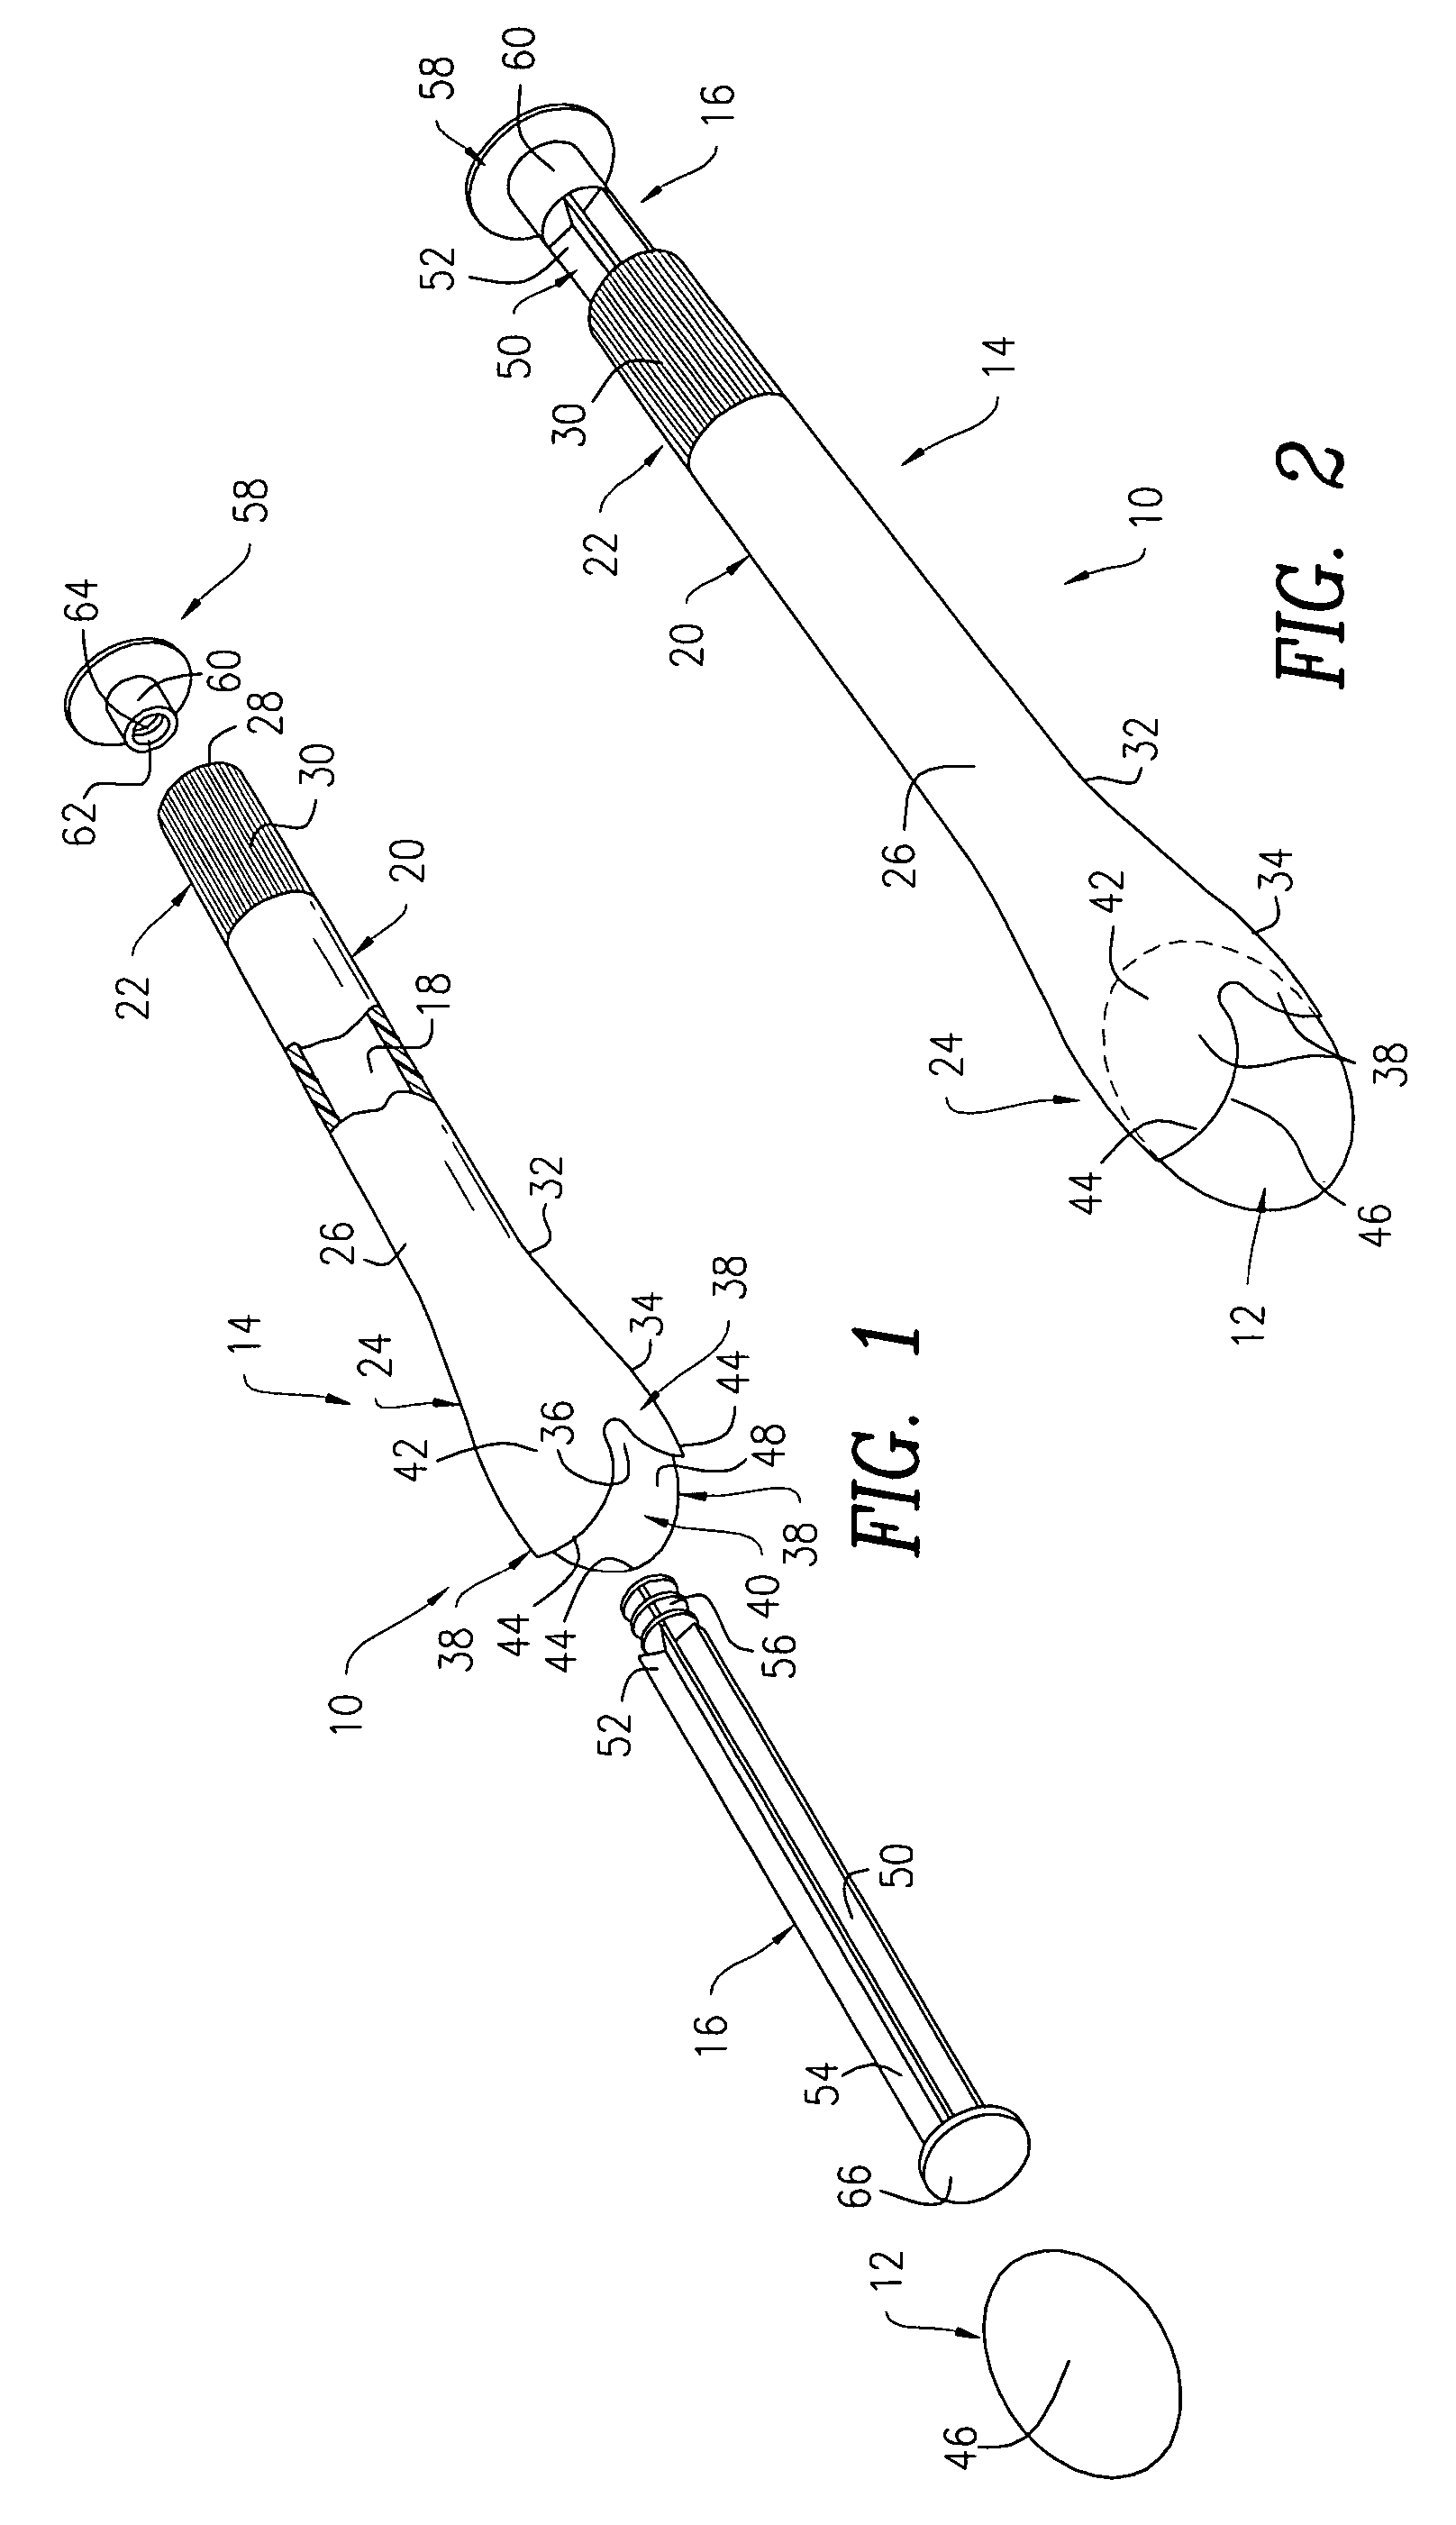 Applicator device for suppositories and the like